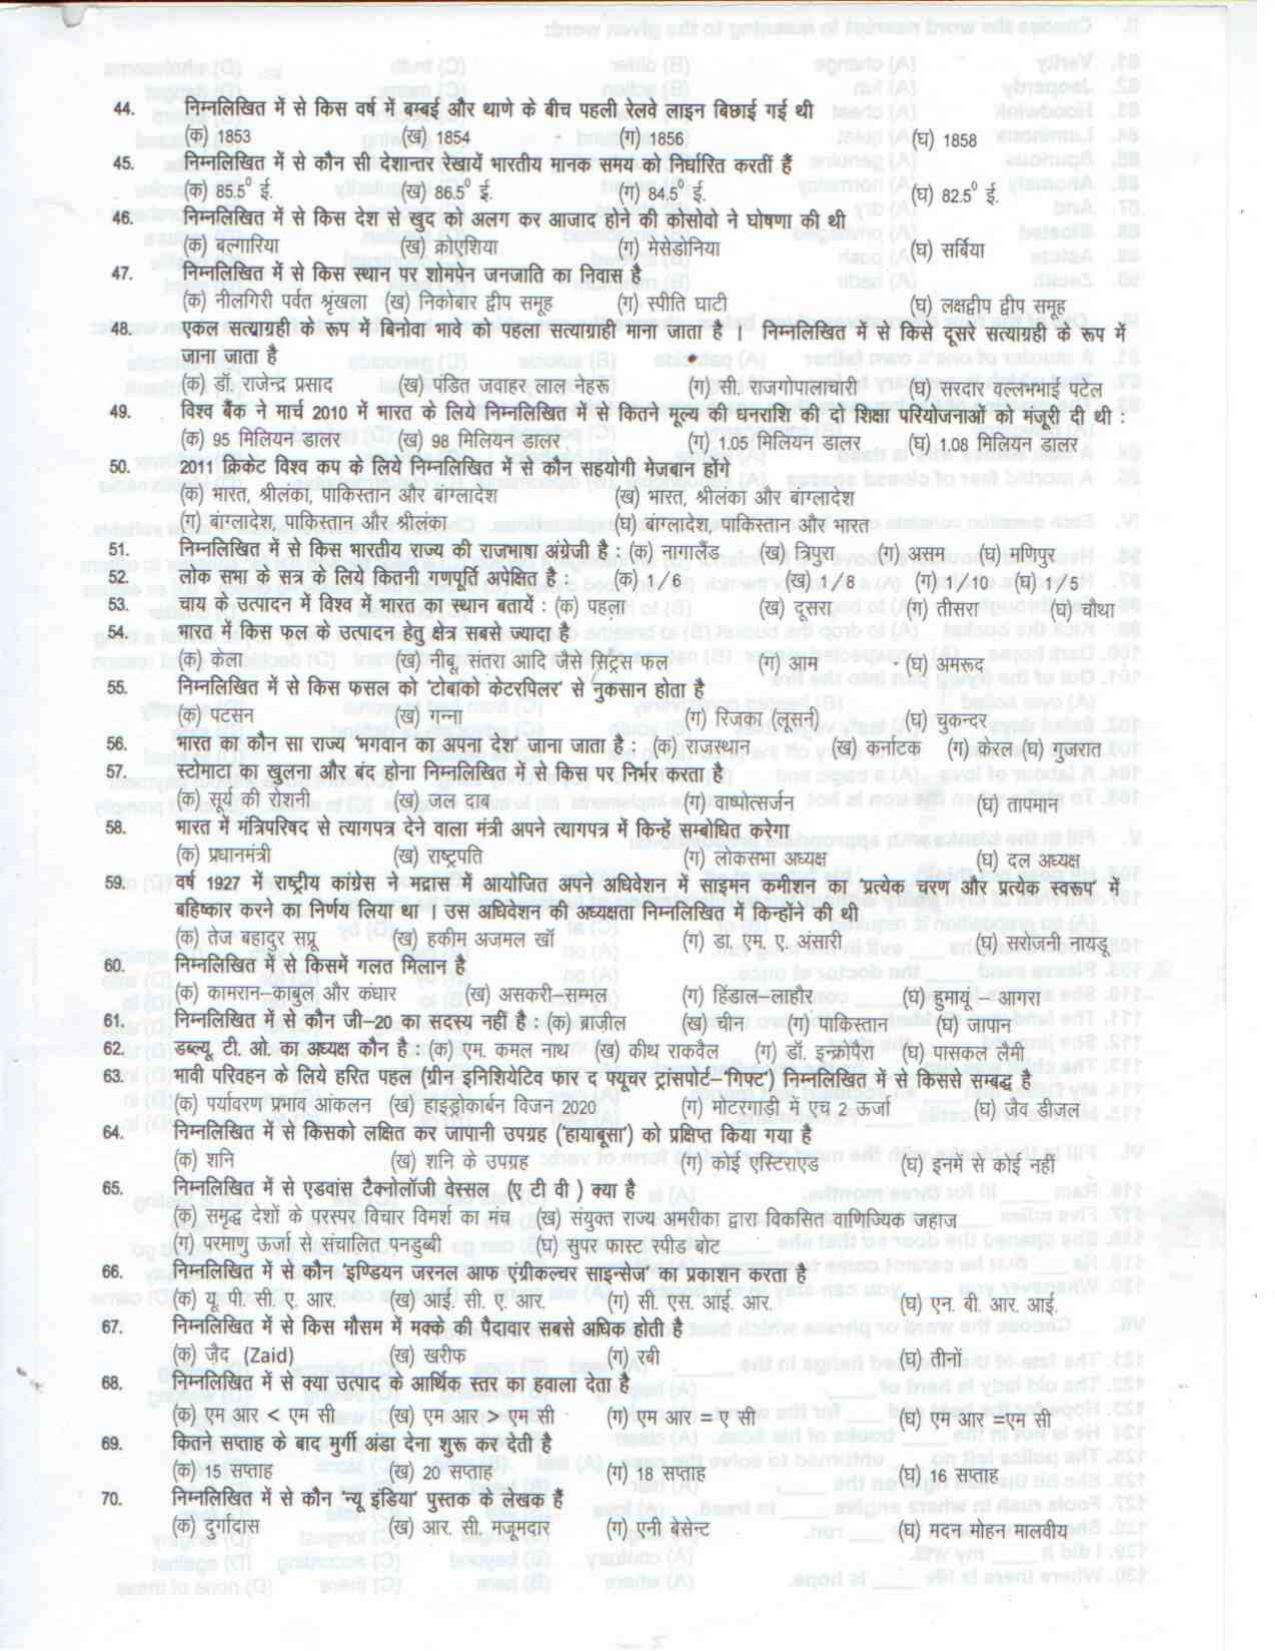 TS EAMCET 2010 Lok-Rajya Sabha: Security Assistant Grade-II Question Paper with Key (1 August 2010 Held on) - Page 8